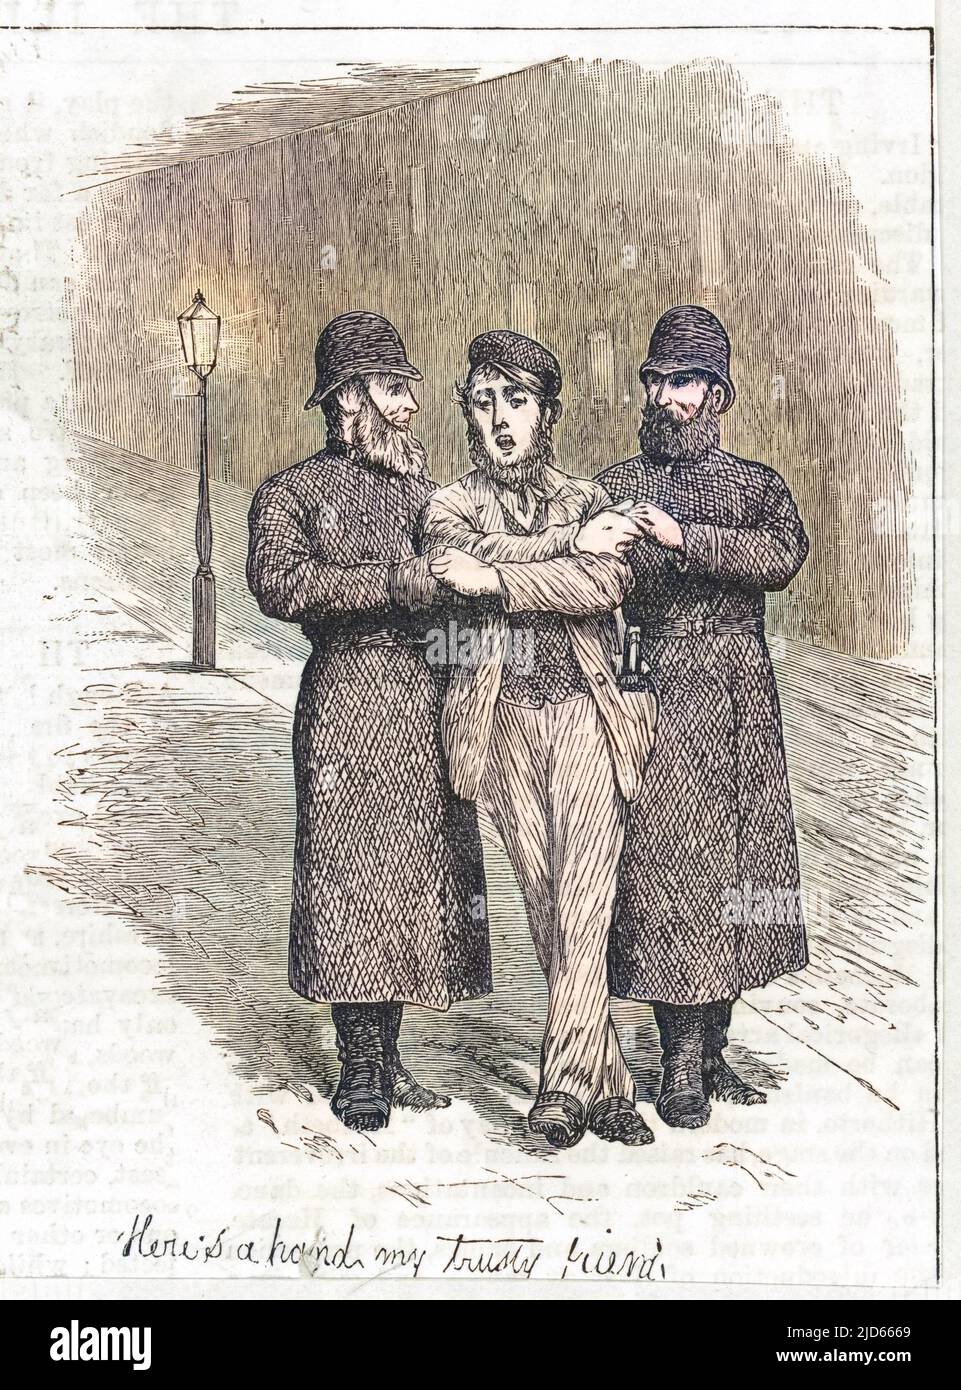 Two policemen guide a drunken man home -- 'Here's a hand my trusty friend'. He rewards their kindness by singing all the way home! Colourised version of : 10005227       Date: 1889 Stock Photo